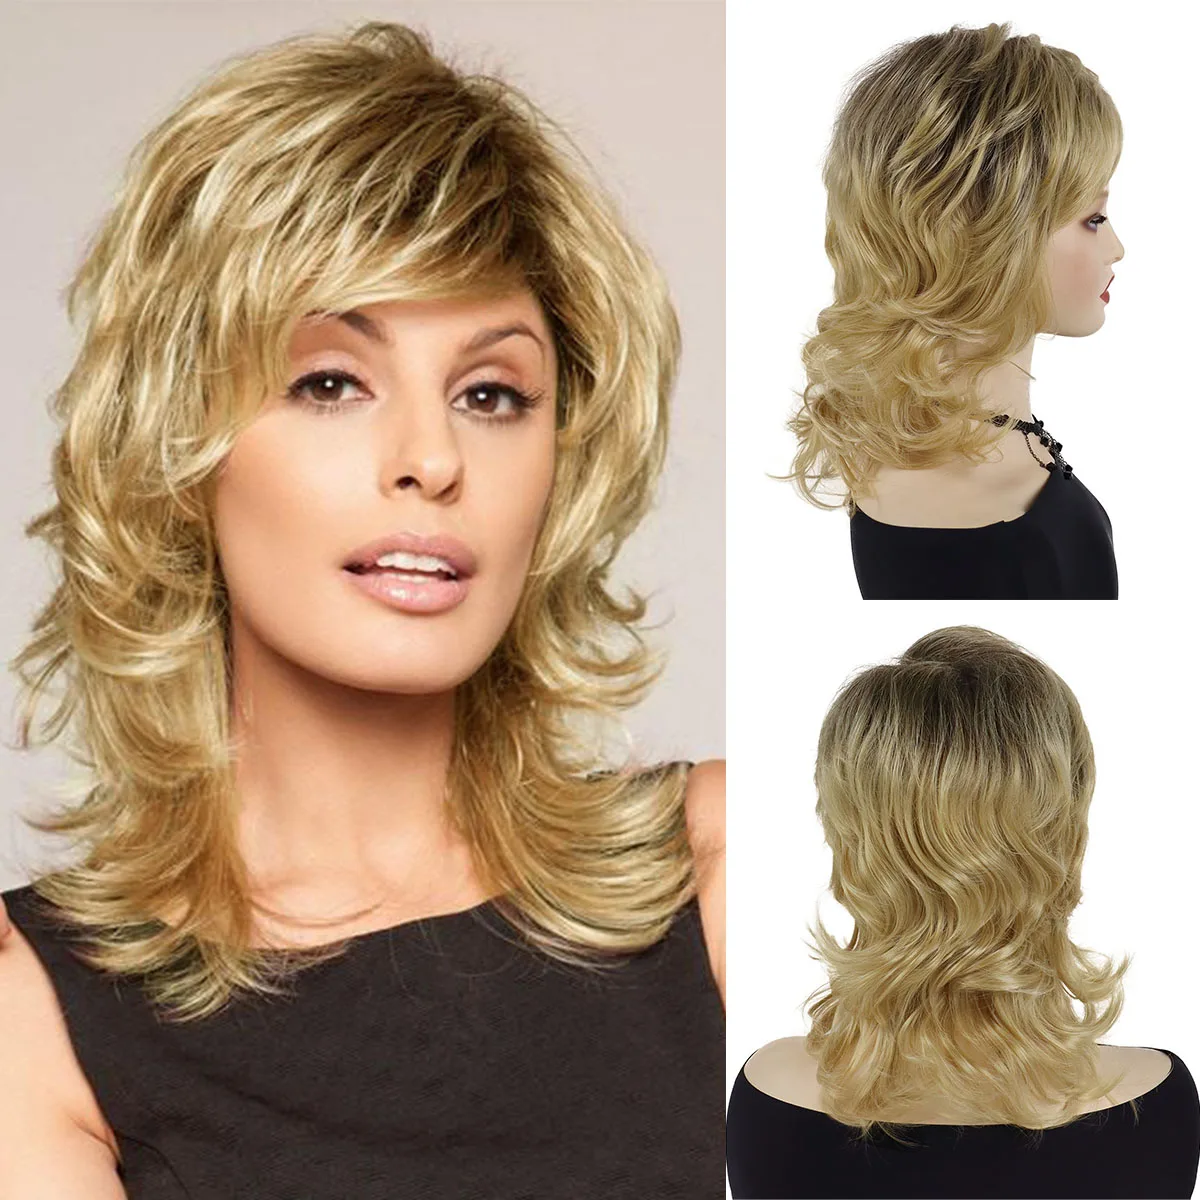 

GNIMEGIL Synthetic Hair Blonde Ombre Wig Long Curly Wig with Bangs for Women Natural Fashion Layered Wig Cosplay Heat Resistant